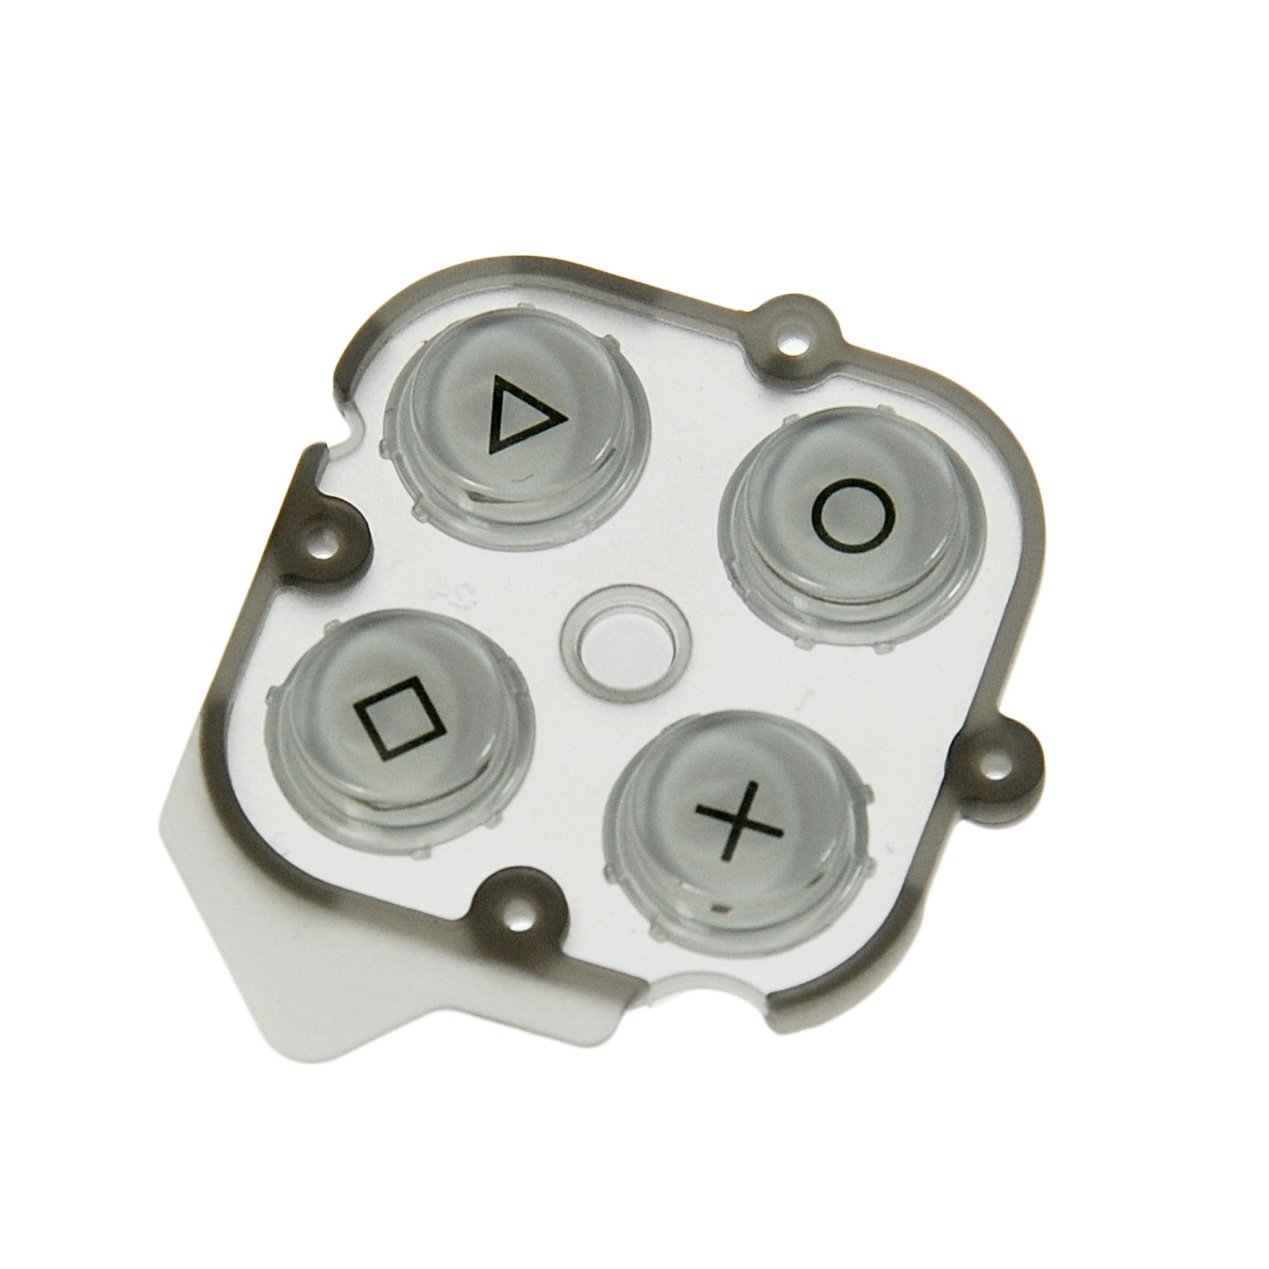 Sony PSP Go Gamepad Buttons Used